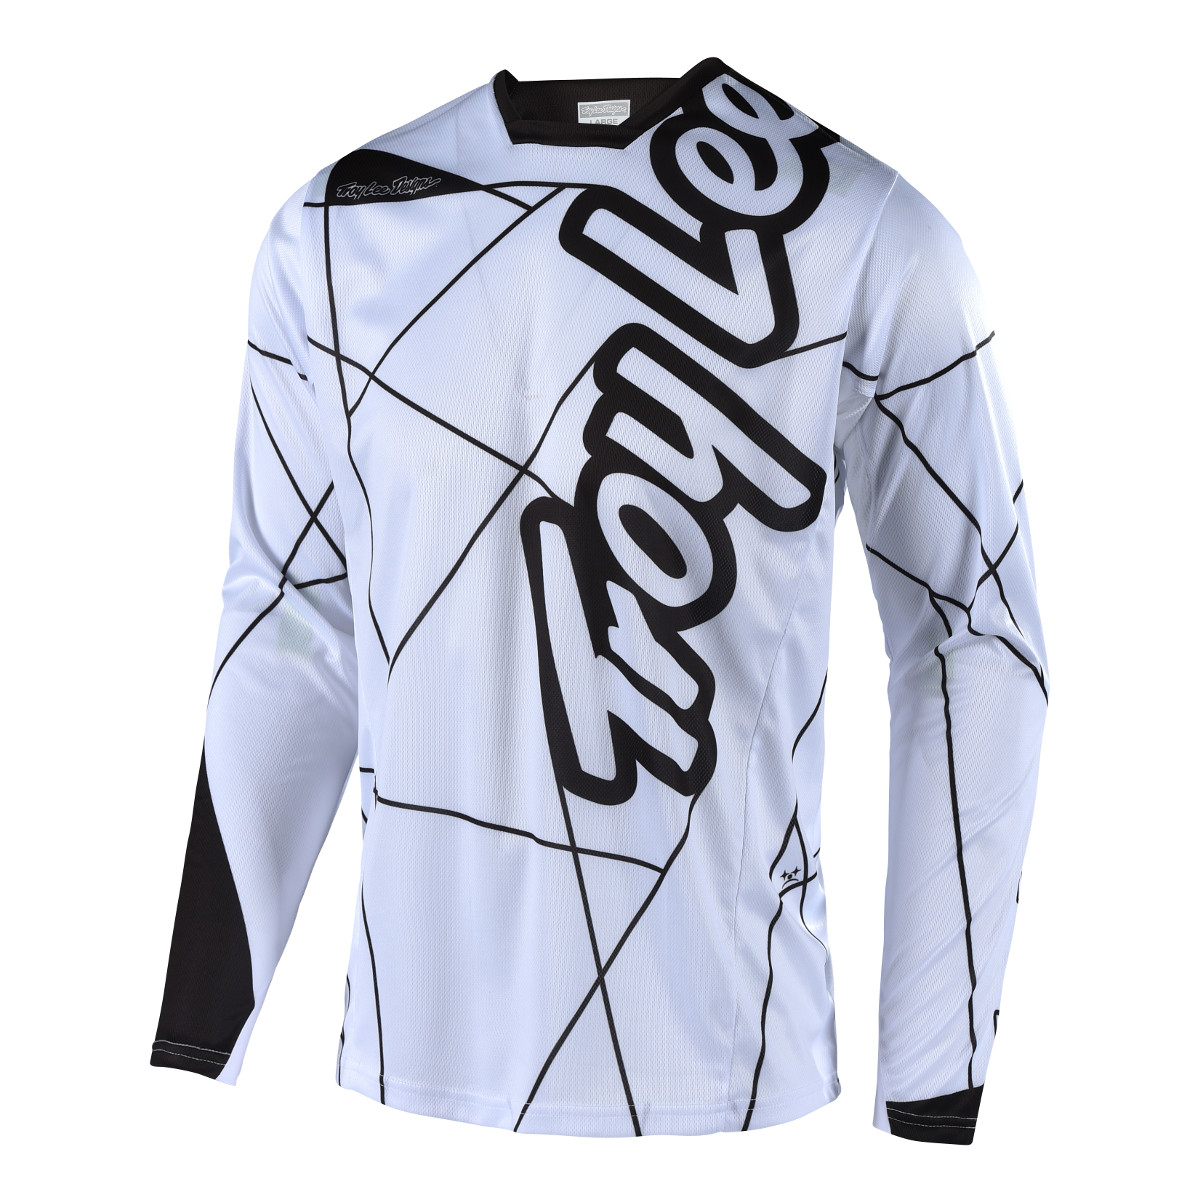 Troy Lee Designs Maillot VTT Manches Longues Sprint Metric - White/Black